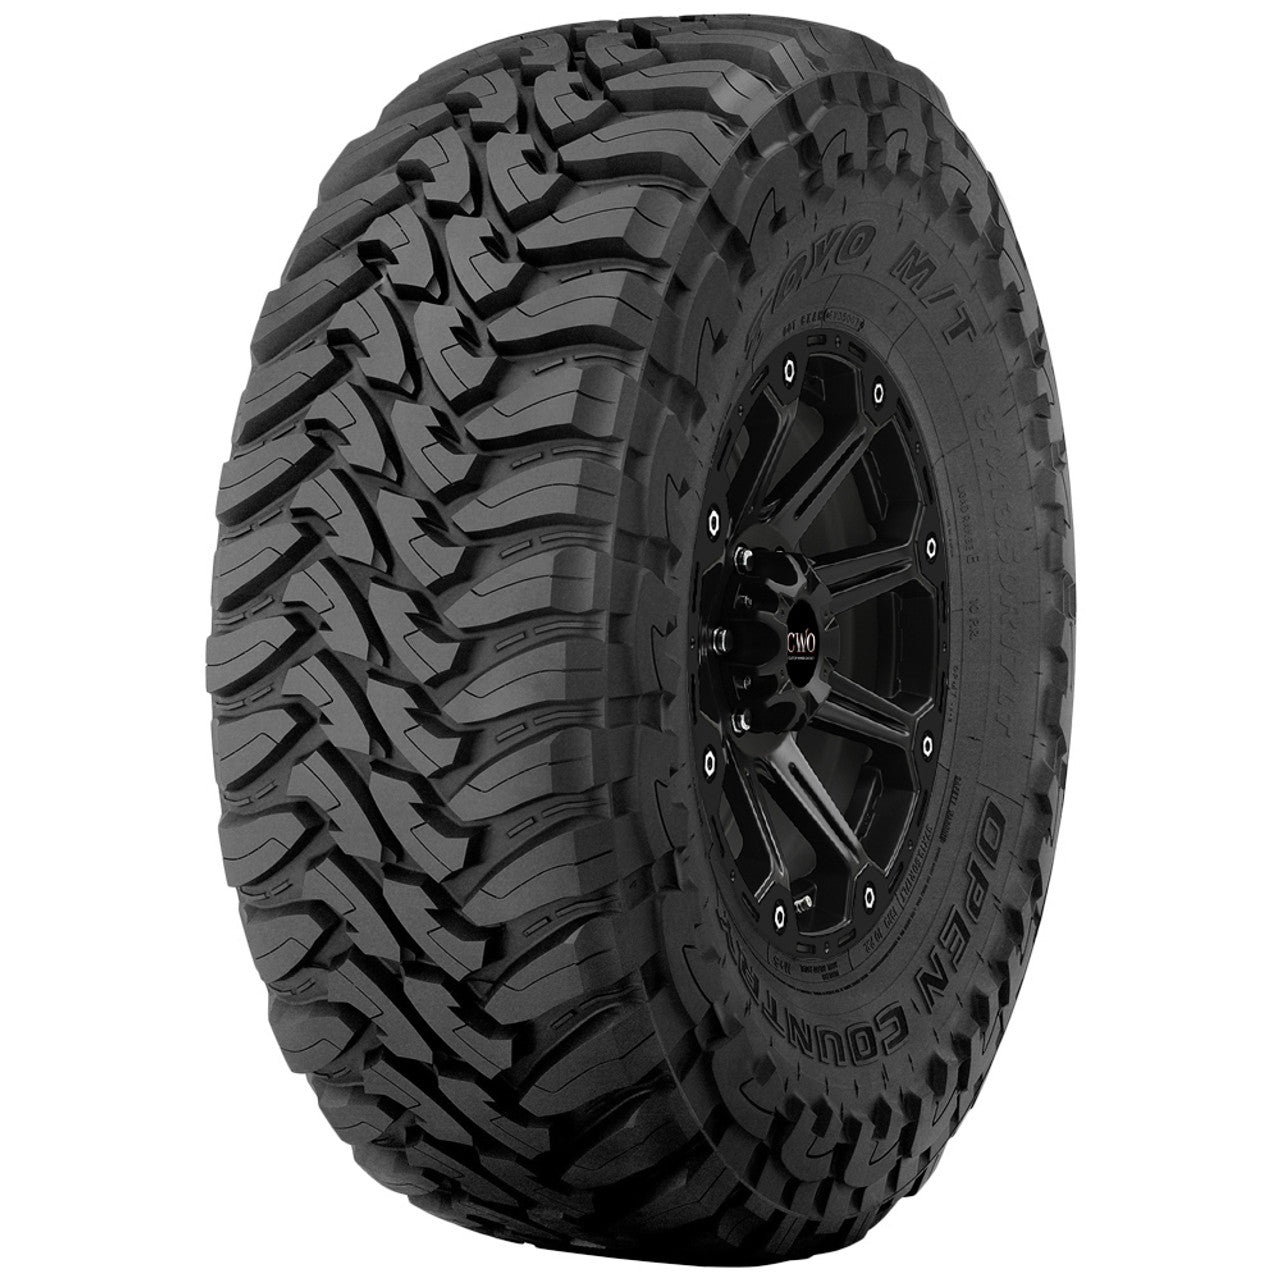 Toyo Open Country Mt - 285/70-17